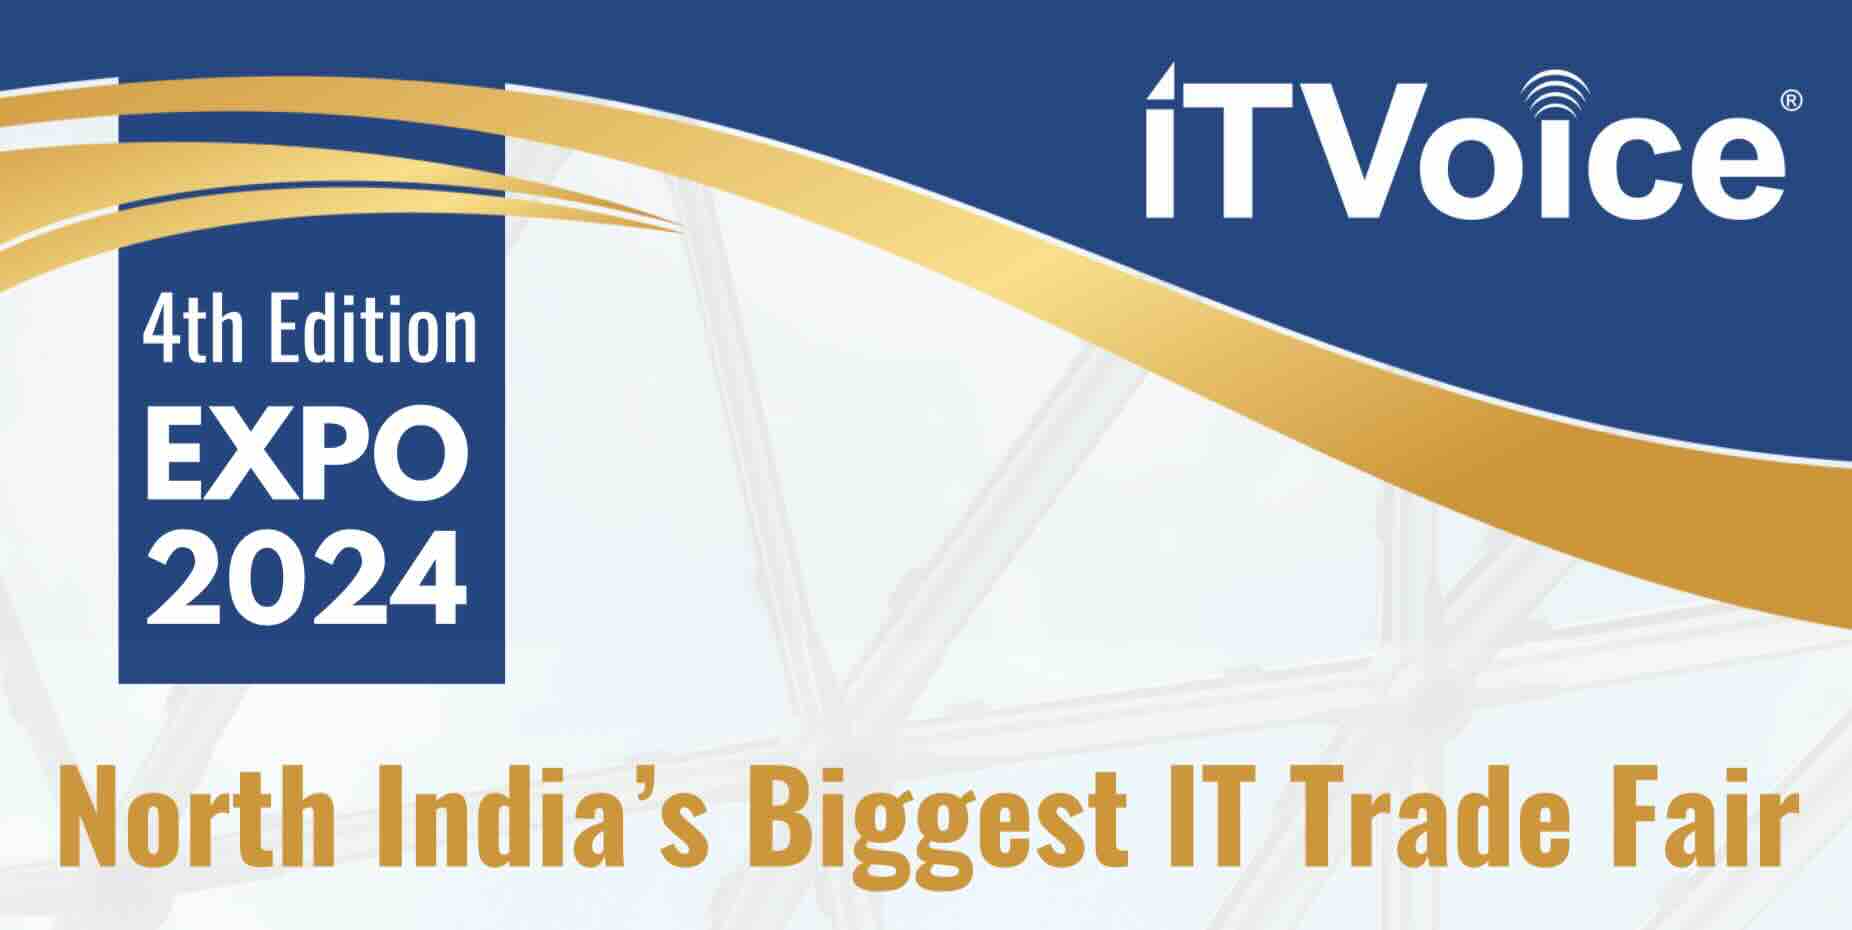 IT VOICE MEDIA ANNOUNCES THE 4TH EDITION OF IT VOICE EXPO: NORTH INDIA’S FLAGSHIP IT TRADE FAIR IN JAIPUR